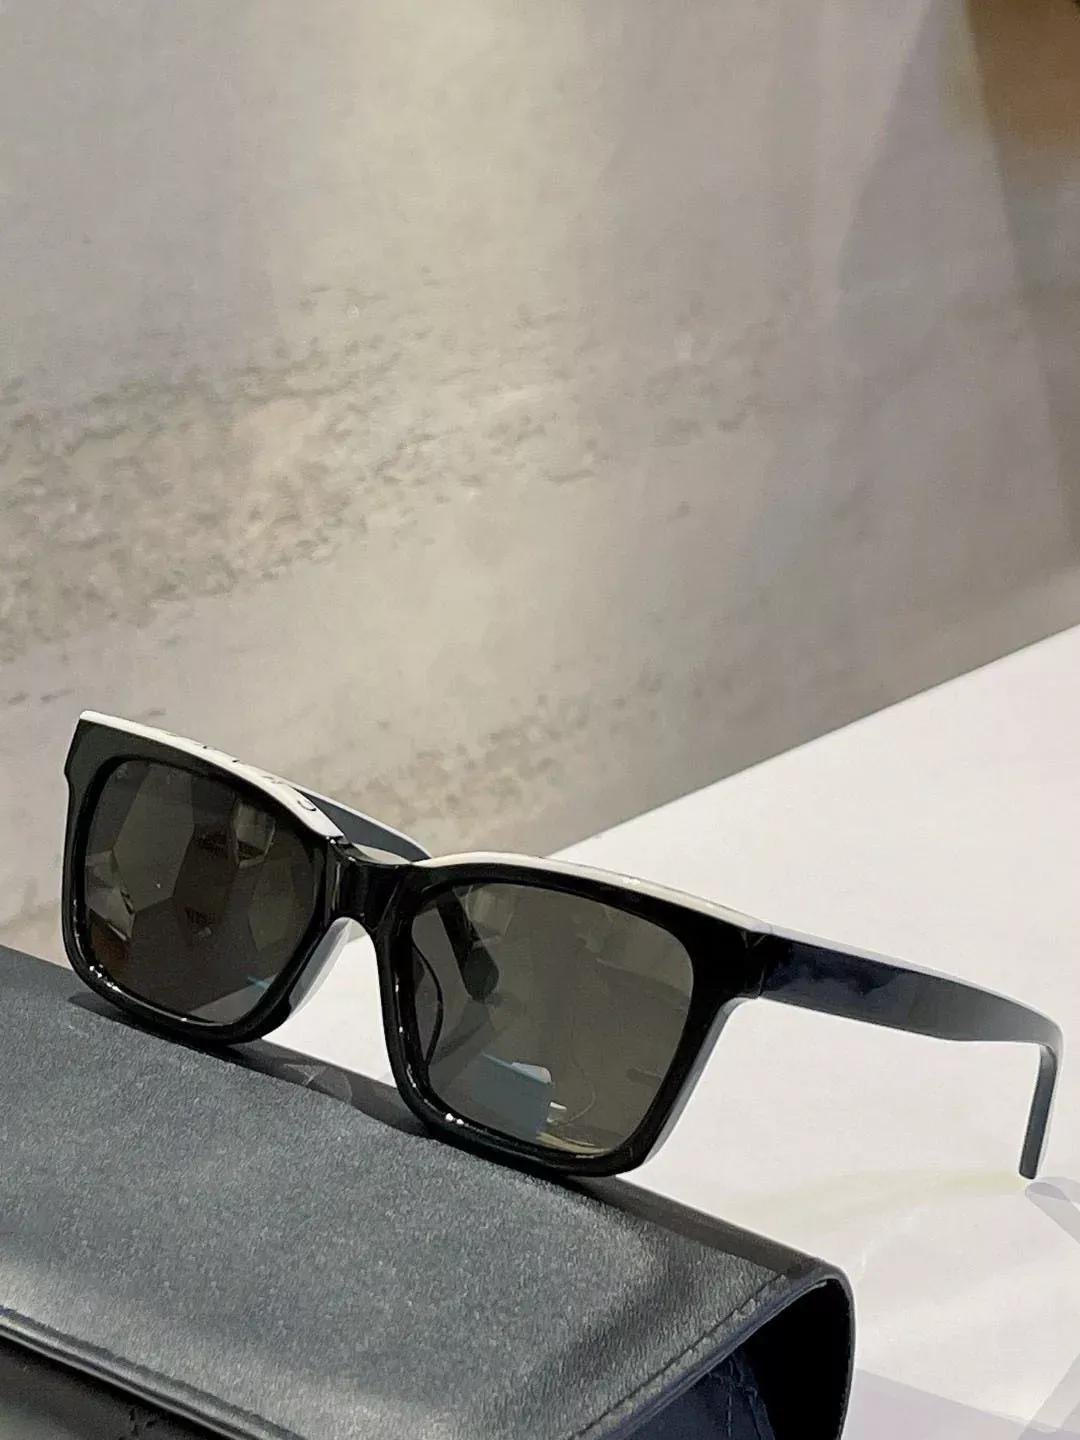 Chanel at Sunglass Hut curated on LTK